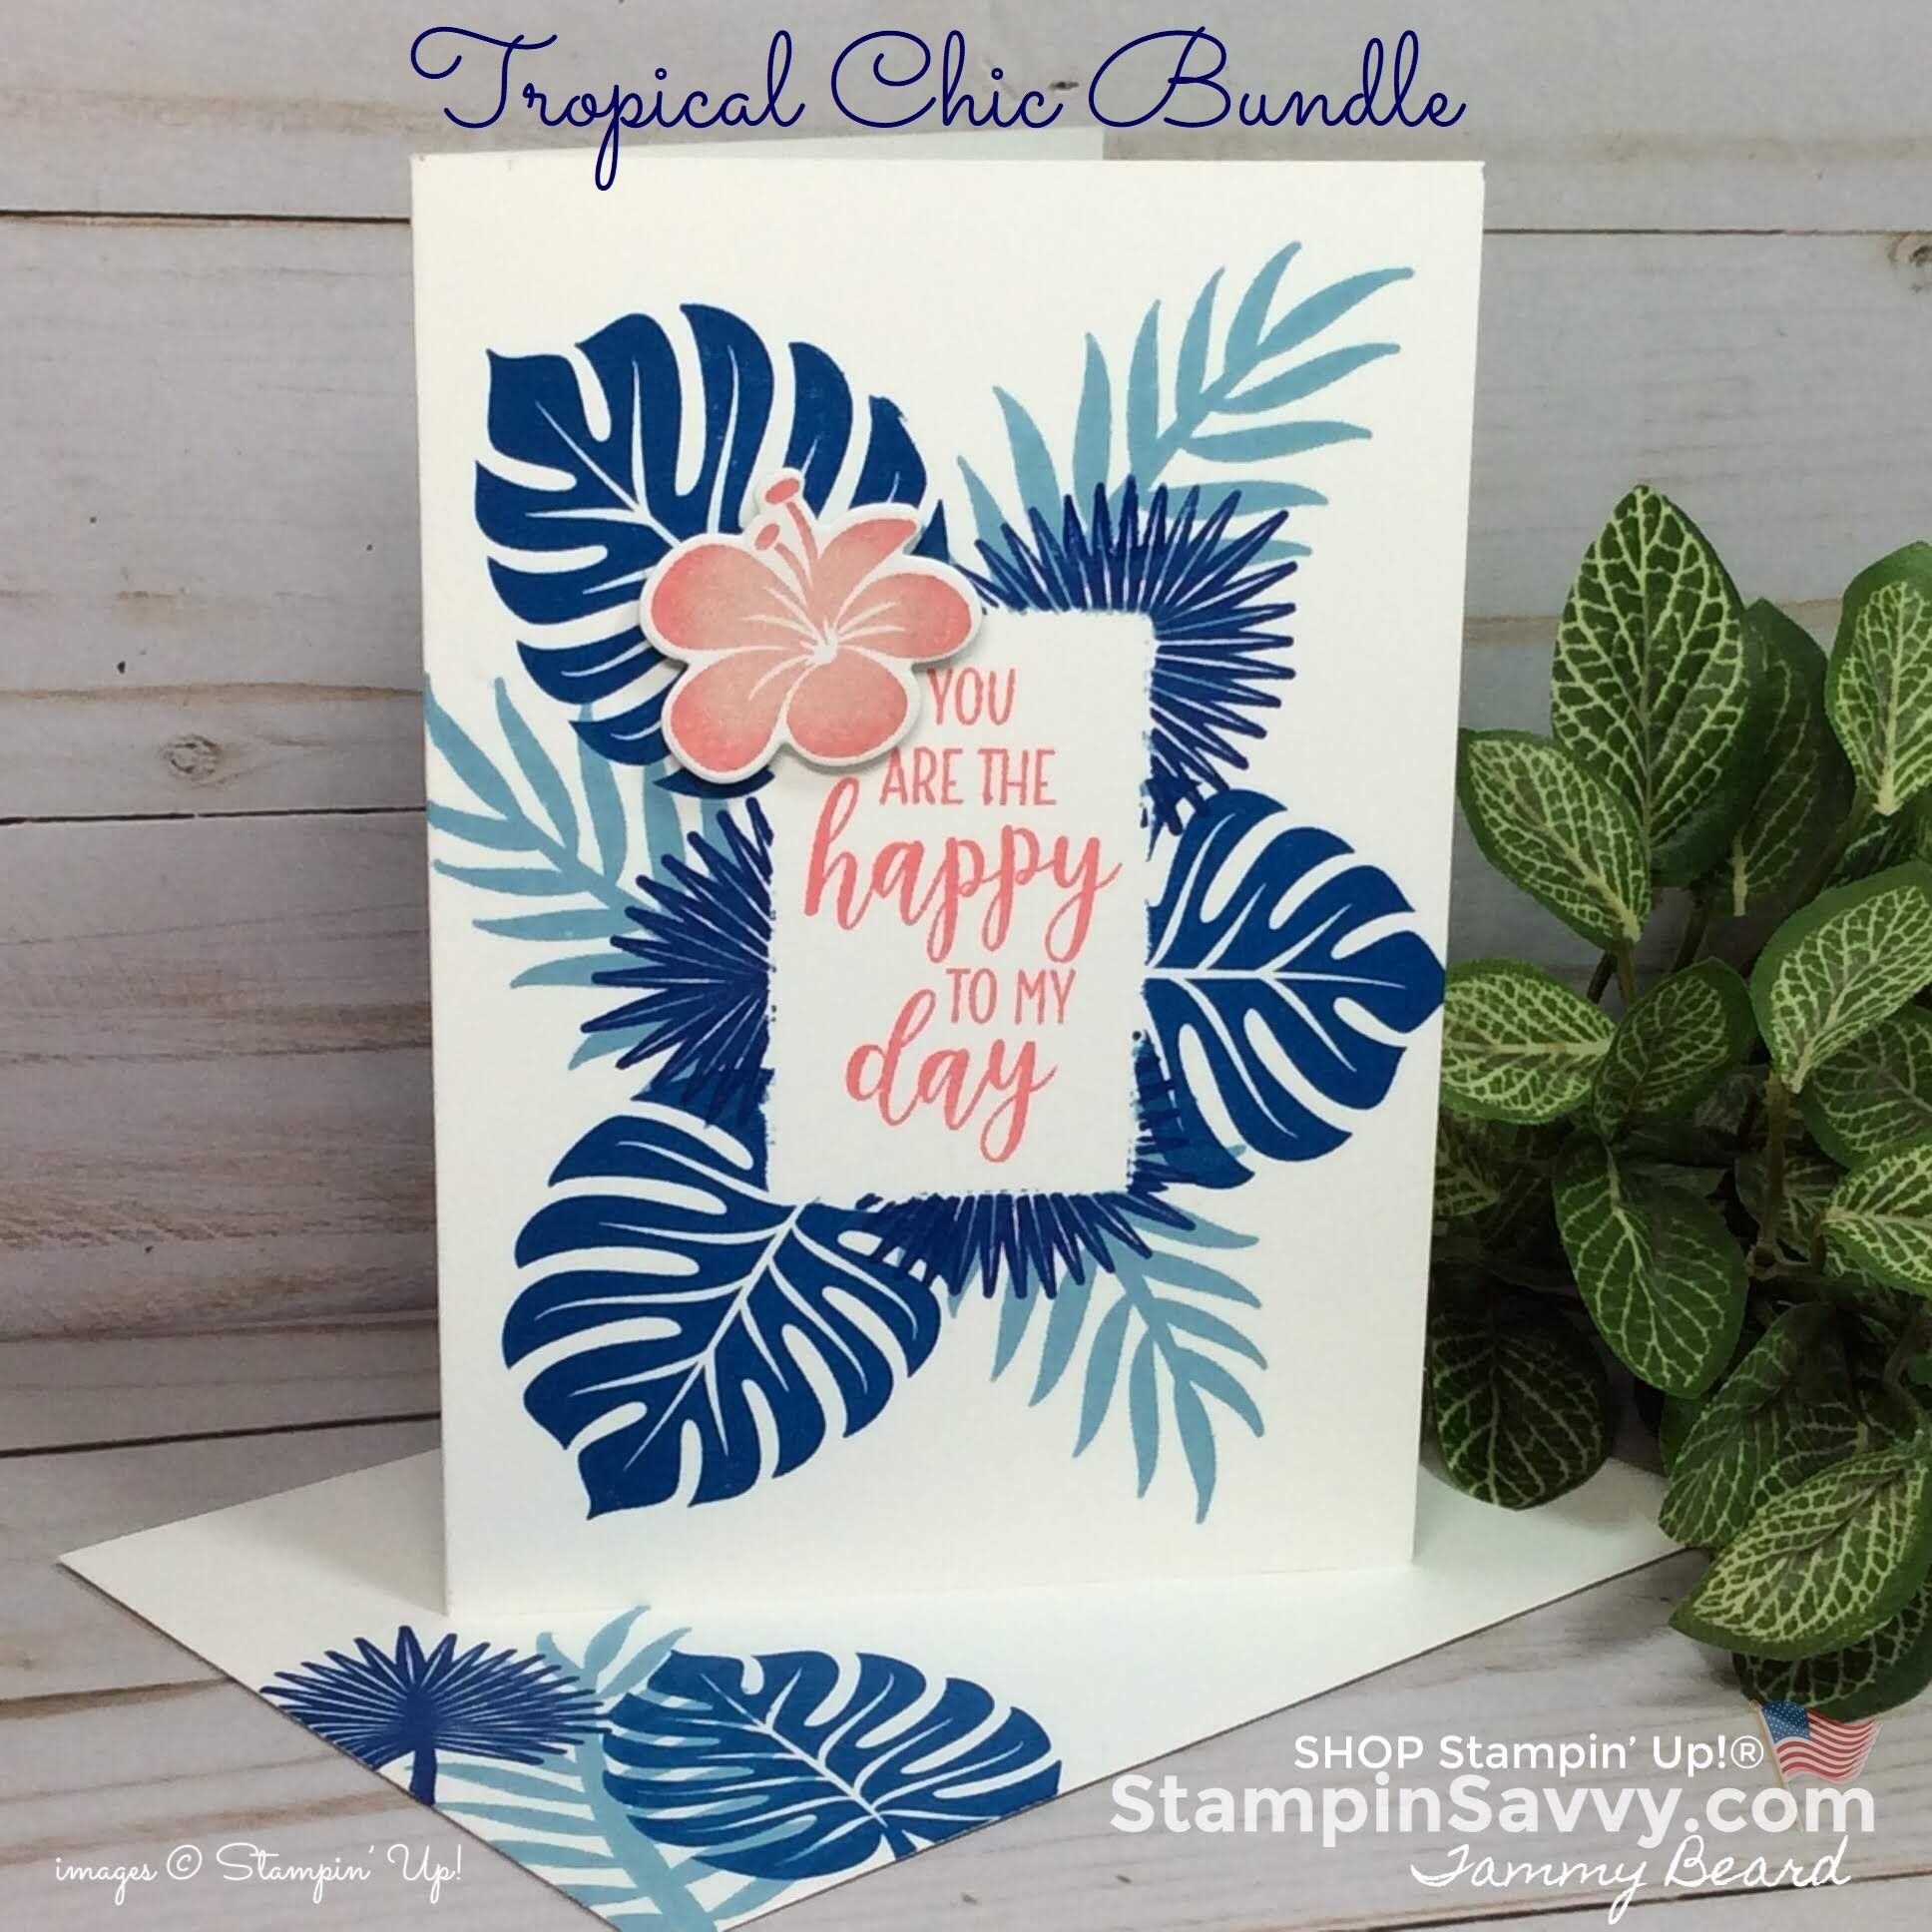 Papercraft Christmas Cards Tropical Chic Stampin Up Cards with Simple Masking Technique